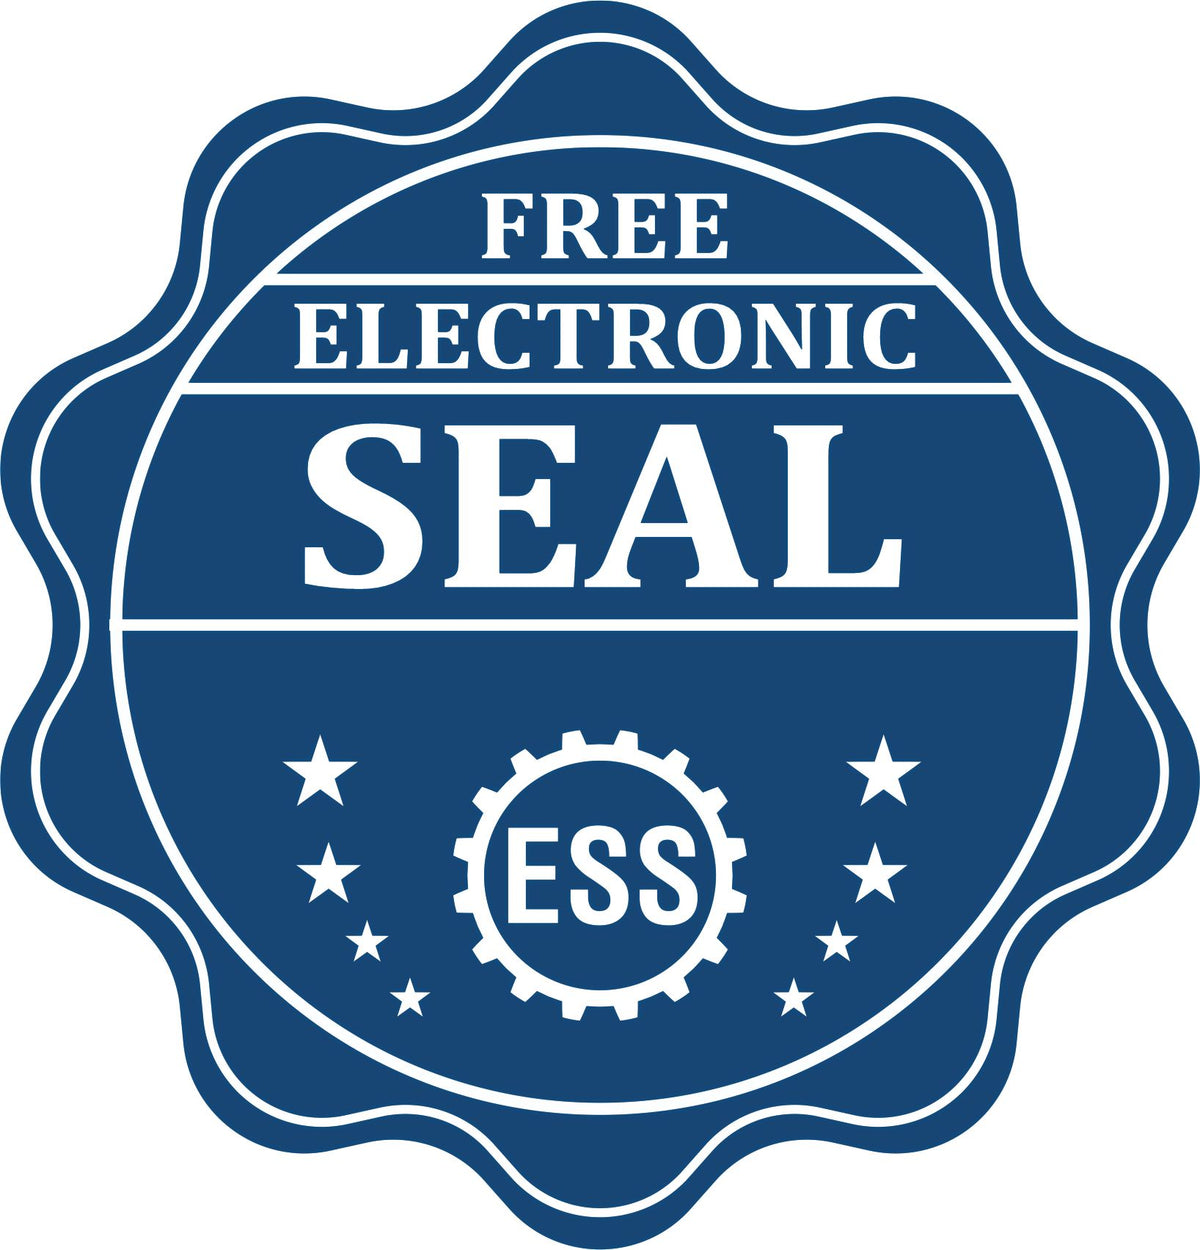 A badge showing a free electronic seal for the Heavy-Duty Washington Rectangular Notary Stamp with stars and the ESS gear on the emblem.